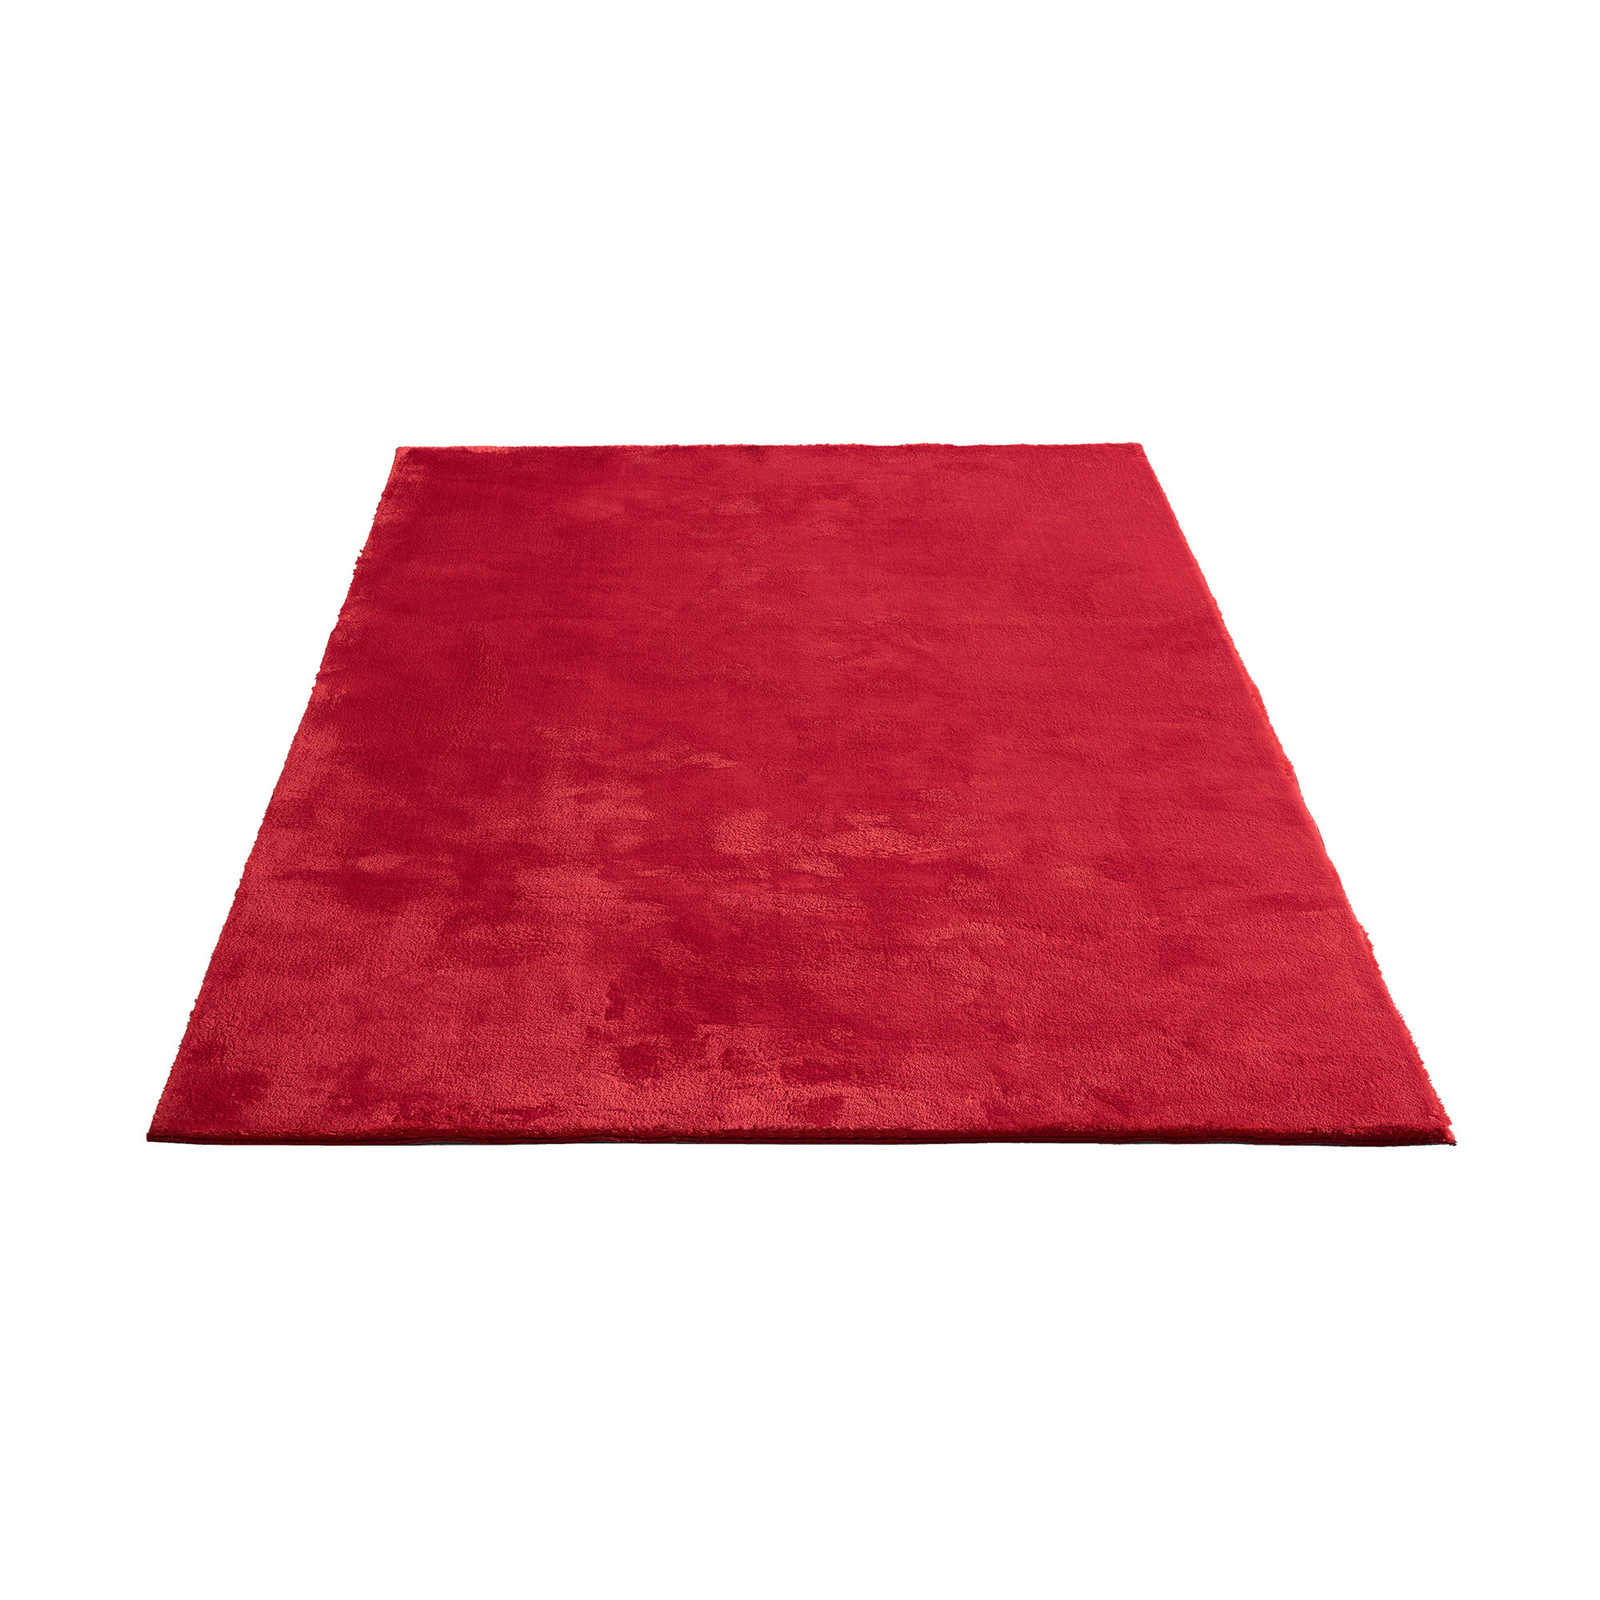 Extra soft high pile carpet in red - 240 x 200 cm
